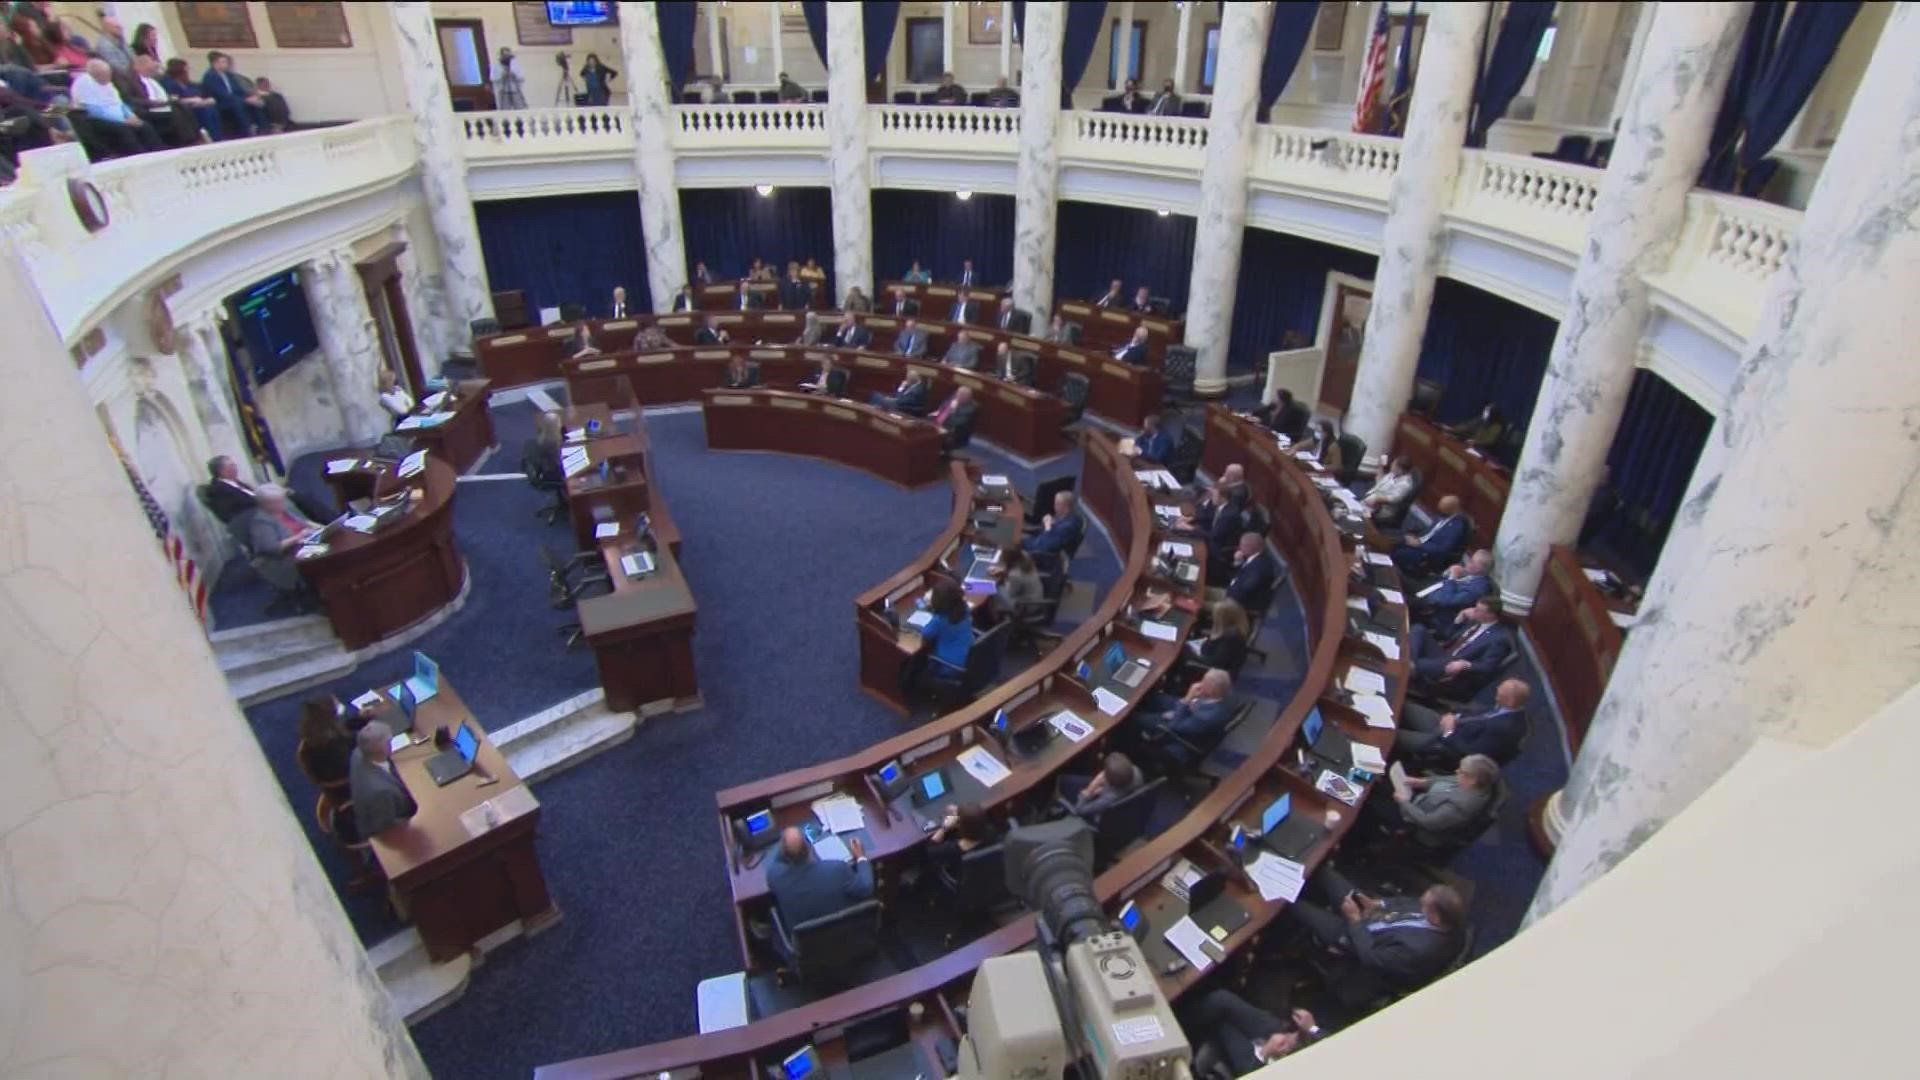 In November, Idahoans will get to vote on if Idaho lawmakers should gain the ability to call themselves back into session.